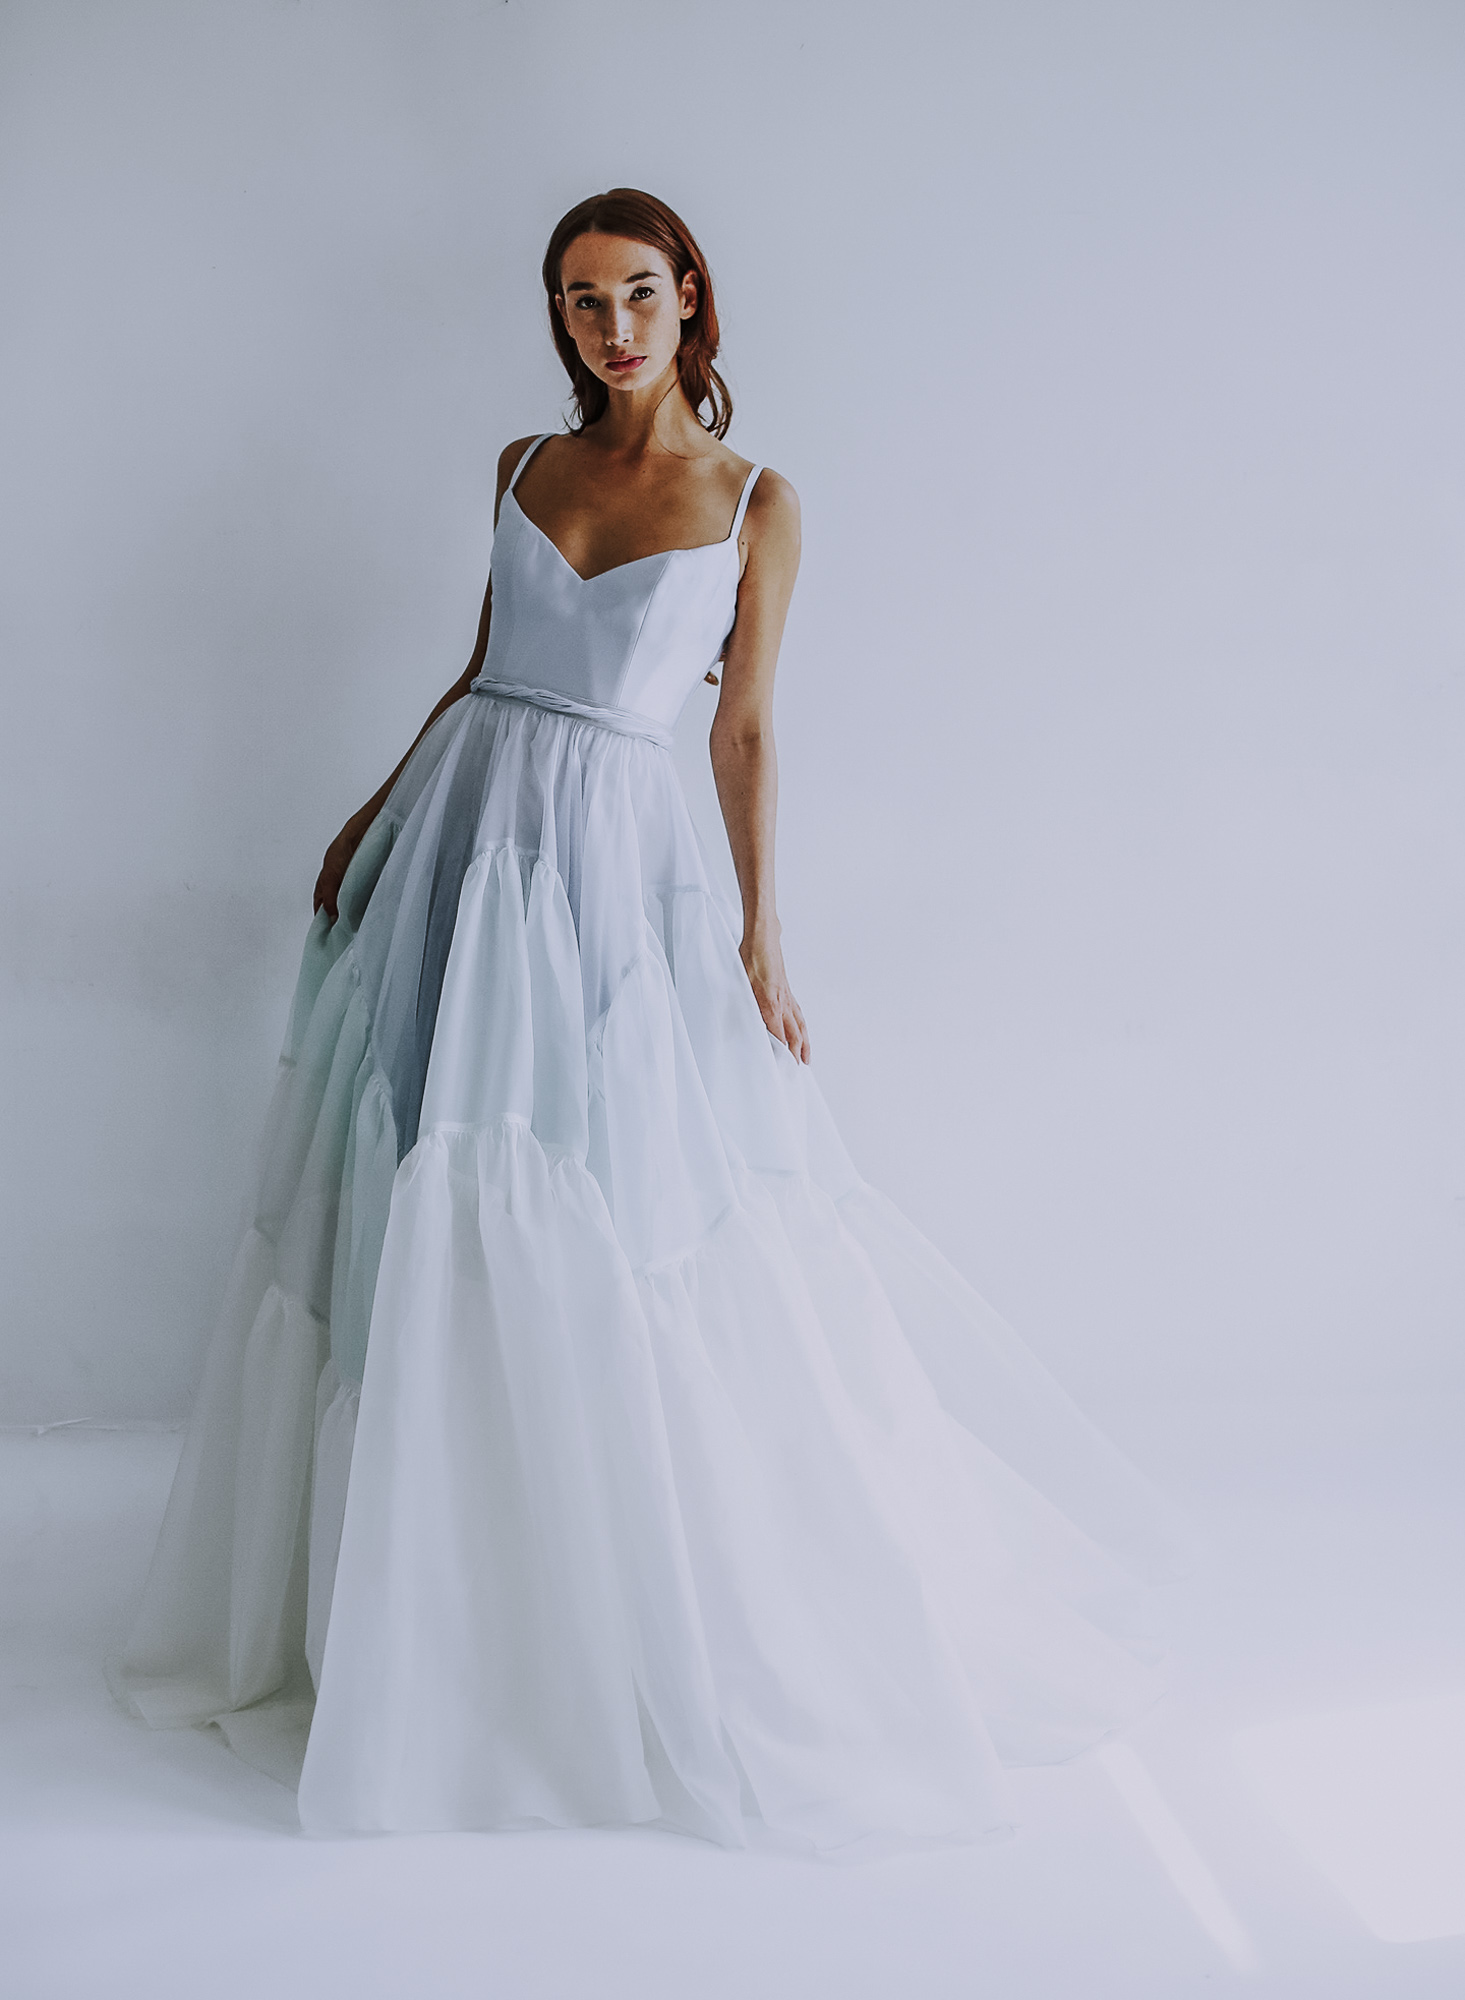 Unique Bridal Gowns and Wedding Dresses — Leanne Marshall